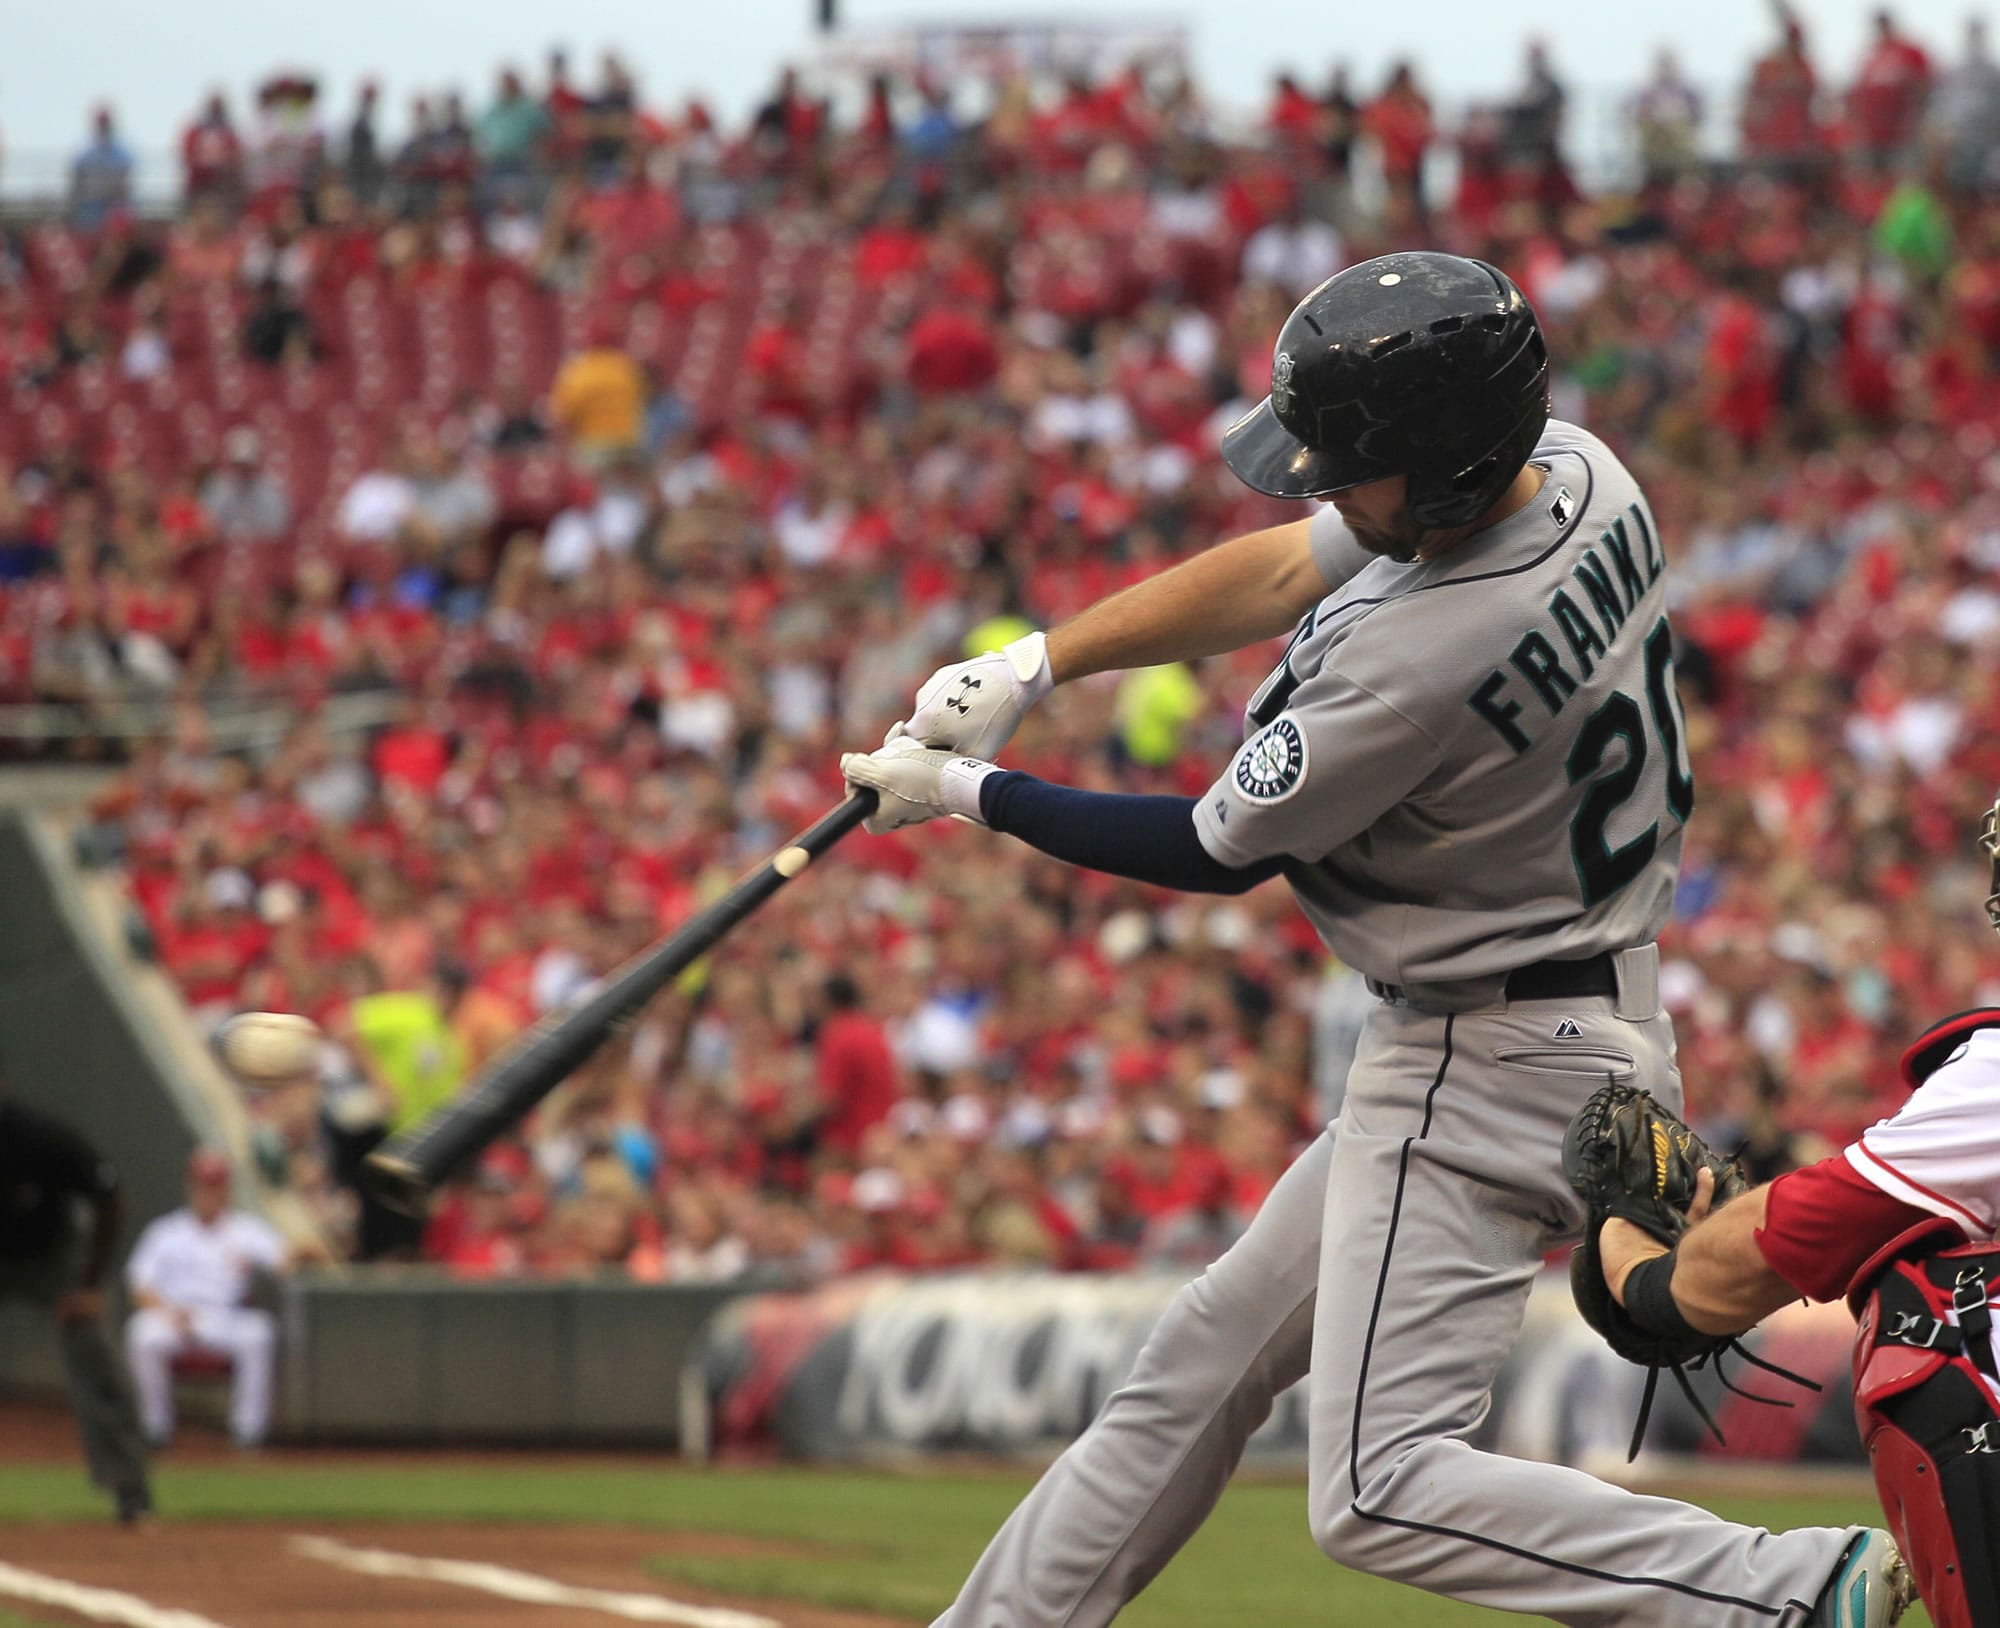 Seattle's Nick Franklin hits a two-run home run in the first inning Friday at Cincinnati.